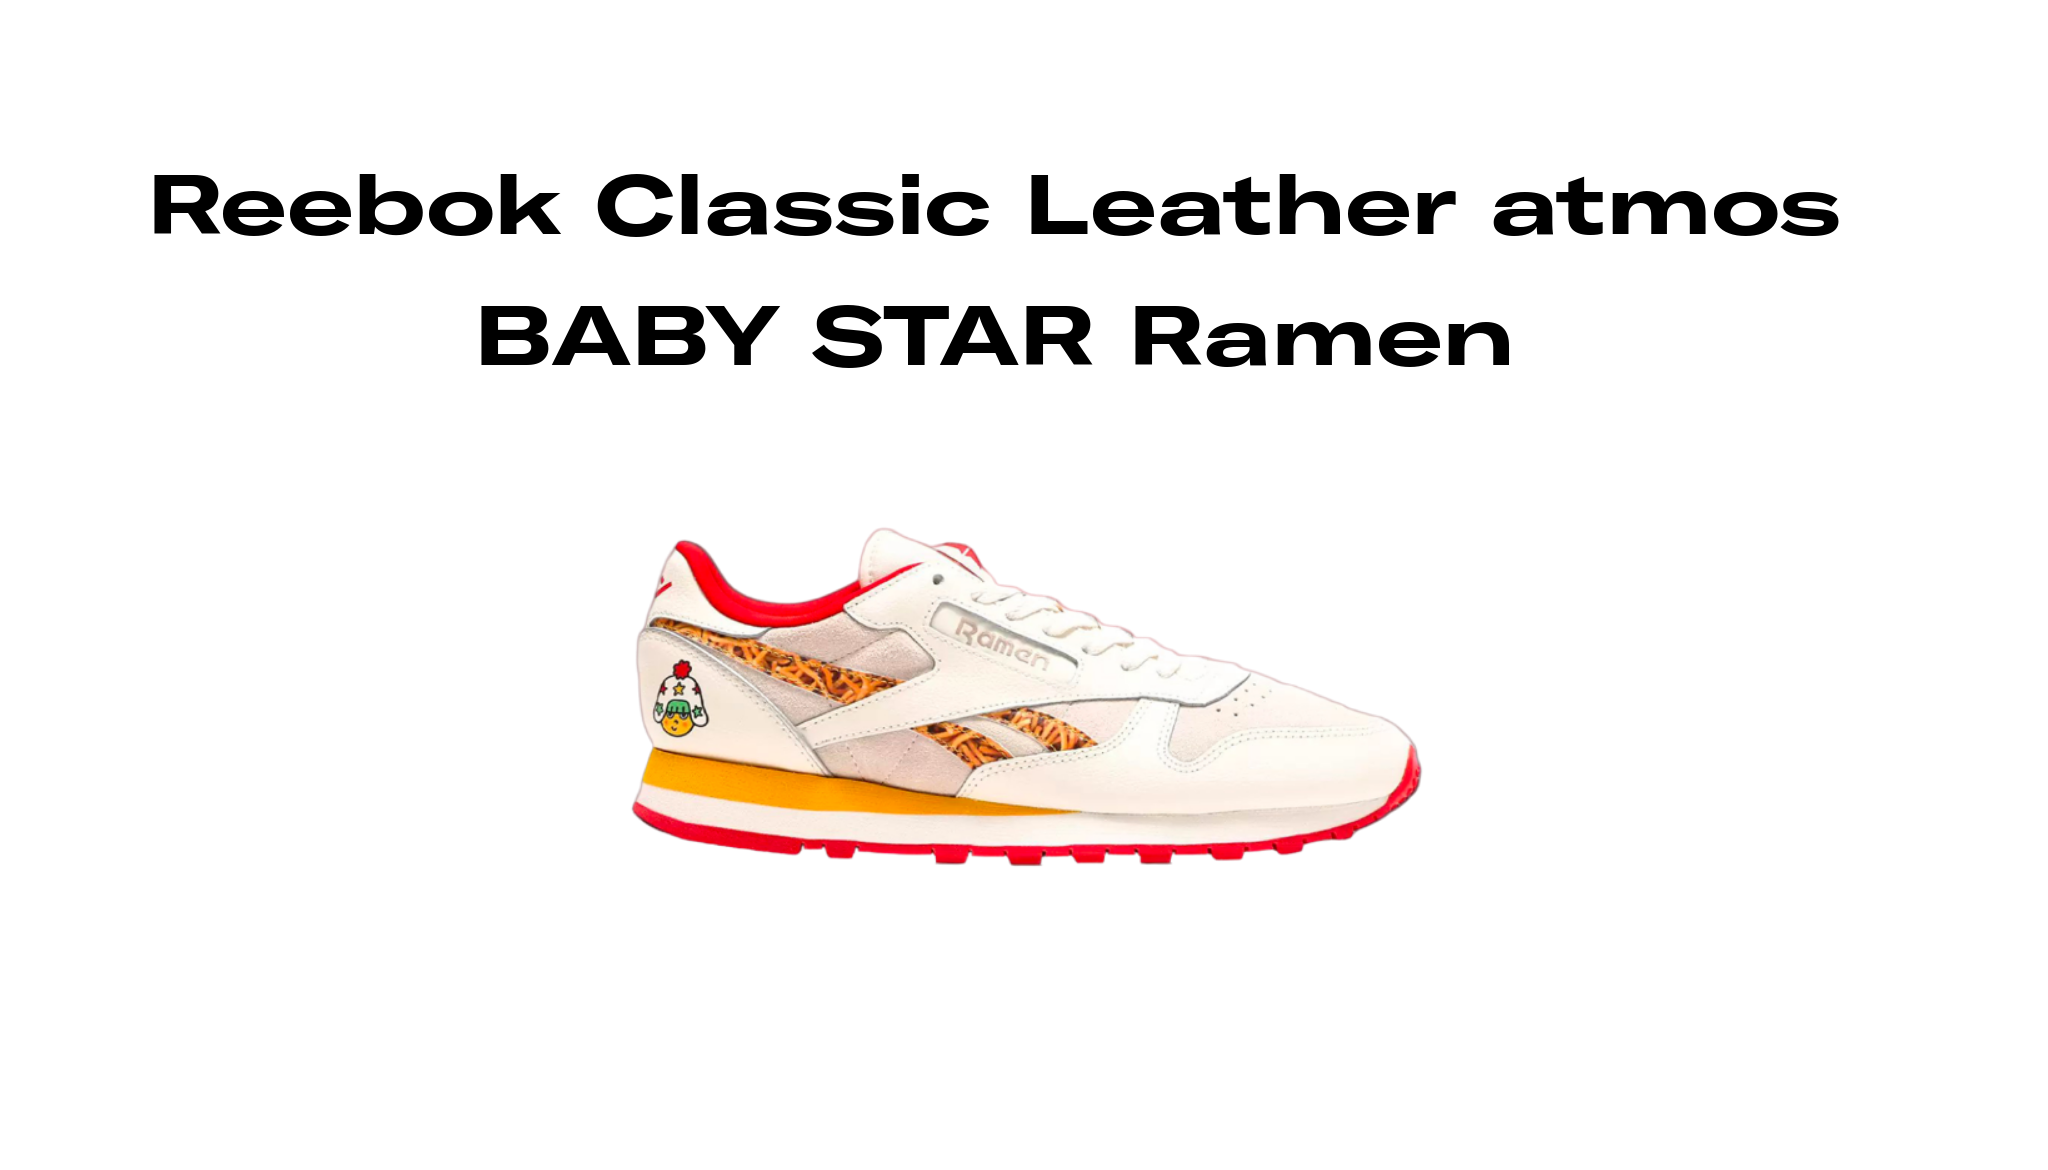 Reebok Classic Leather atmos BABY STAR Ramen, Raffles and Release 